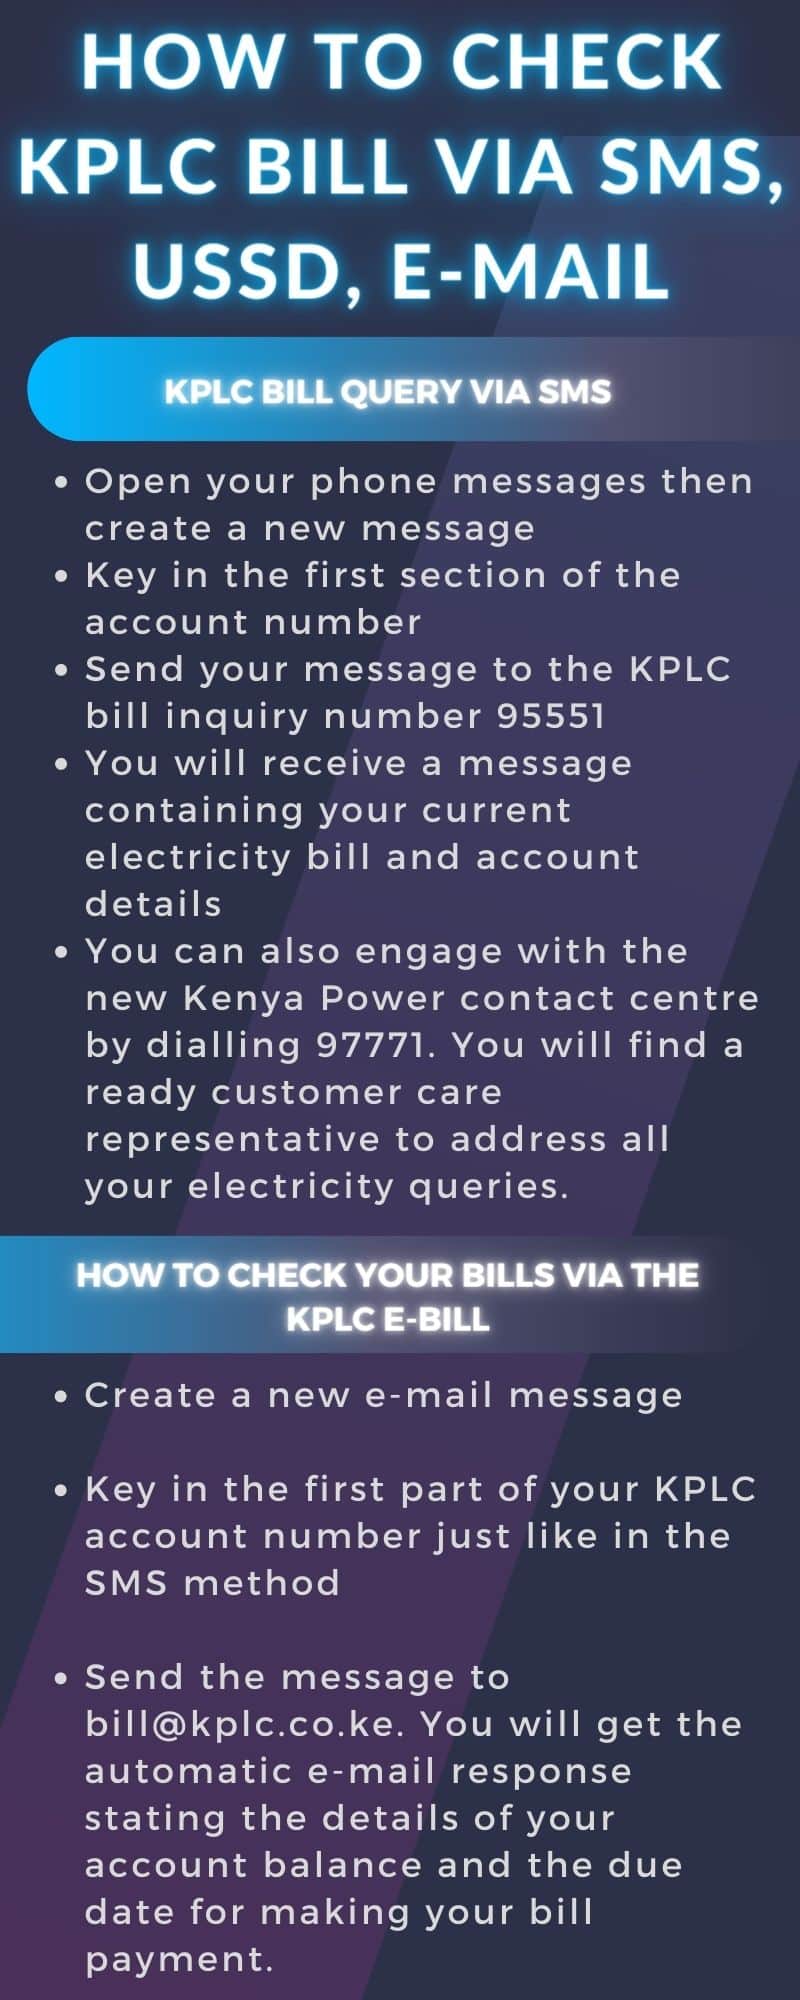 How to check KPLC bill